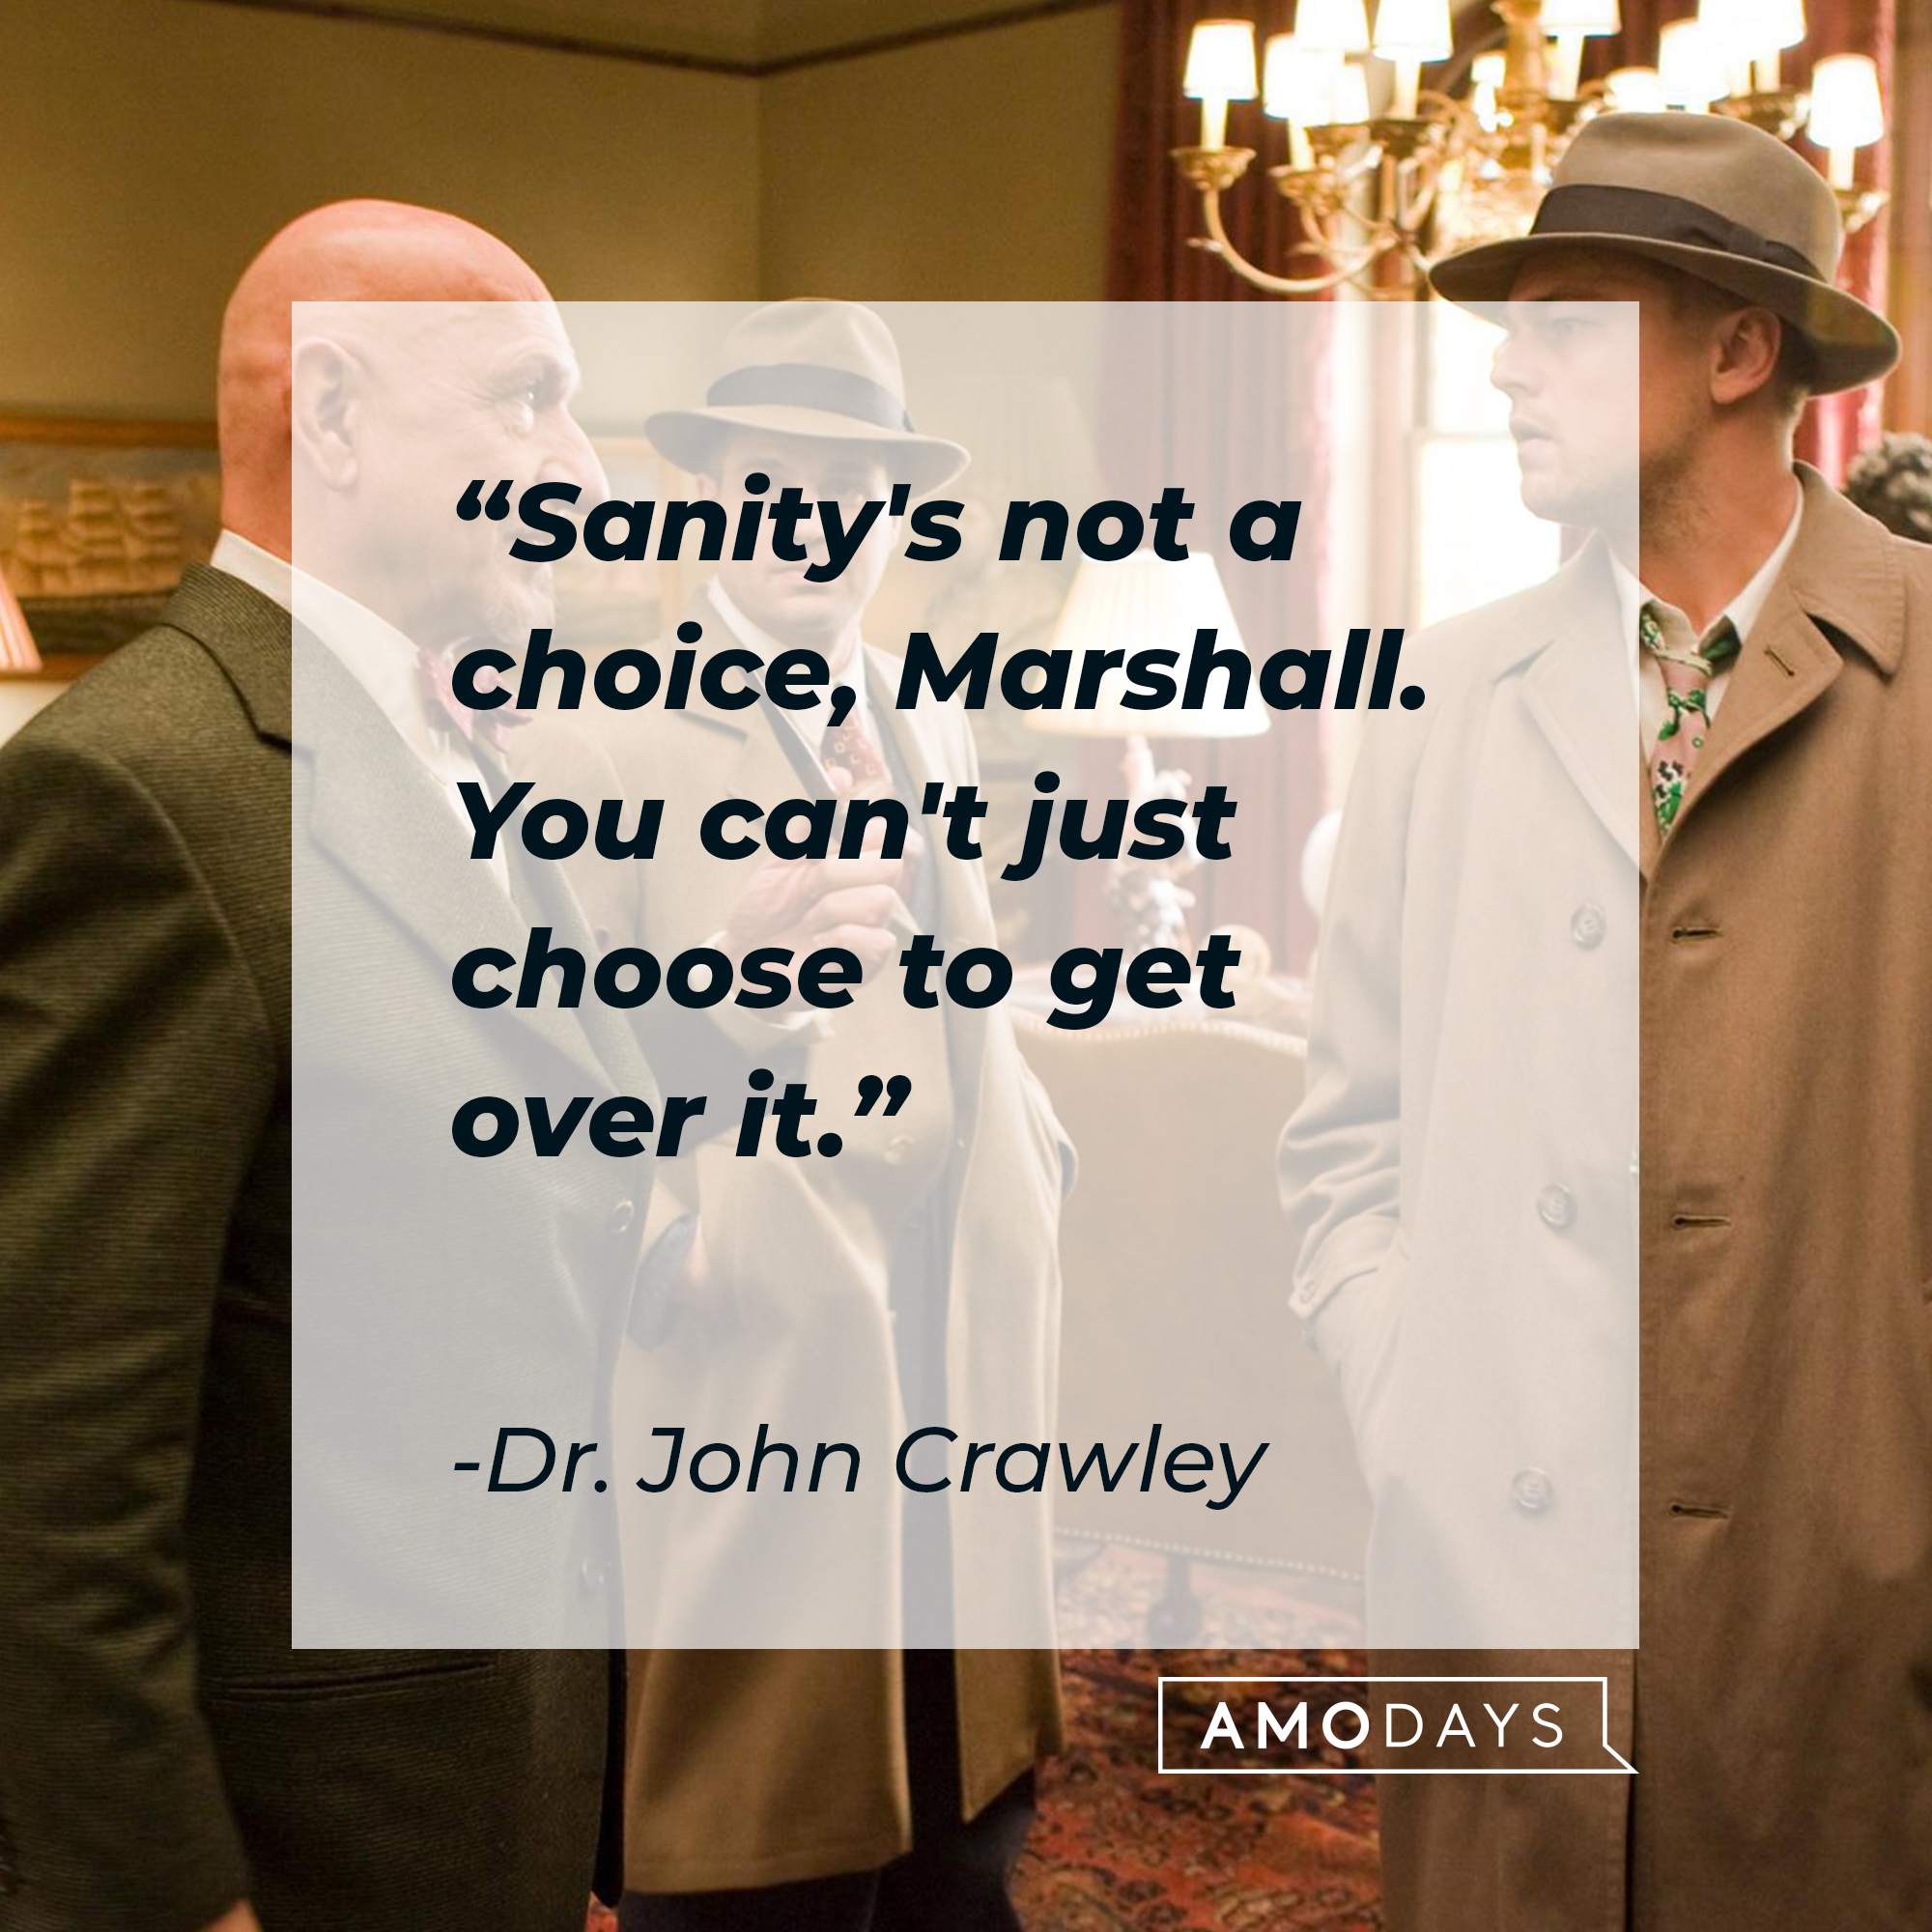 Dr. John Cawley's quote: "Sanity's not a choice, Marshall. You can't just choose to get over it." | Source: facebook.com/ShutterIsland